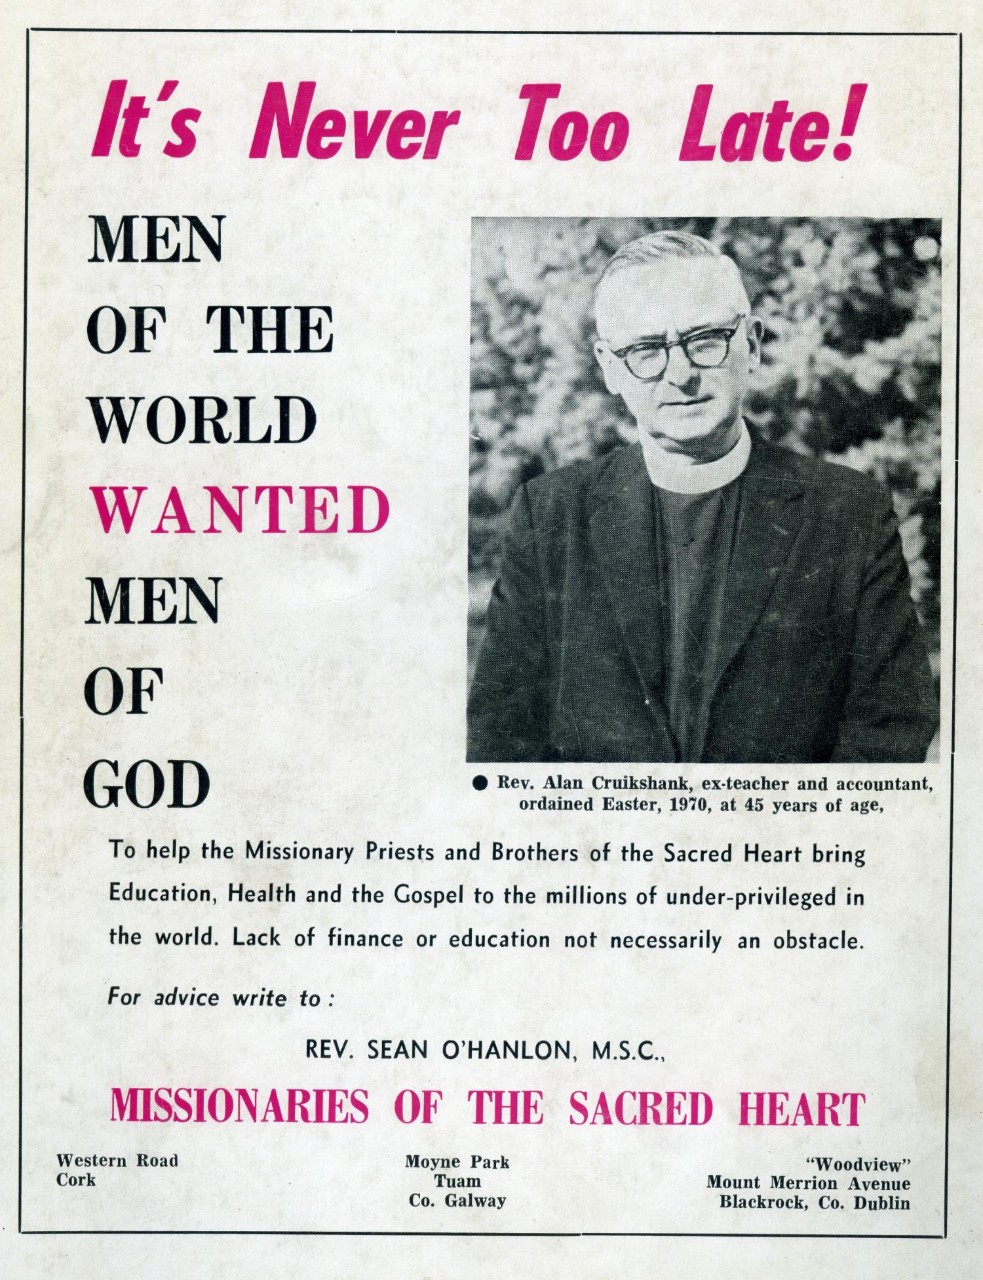 An advertisement by the Missionaries of the Sacred Heart, published on the back of the Our Games Annual from 1972, appealing for men to join them in their work.